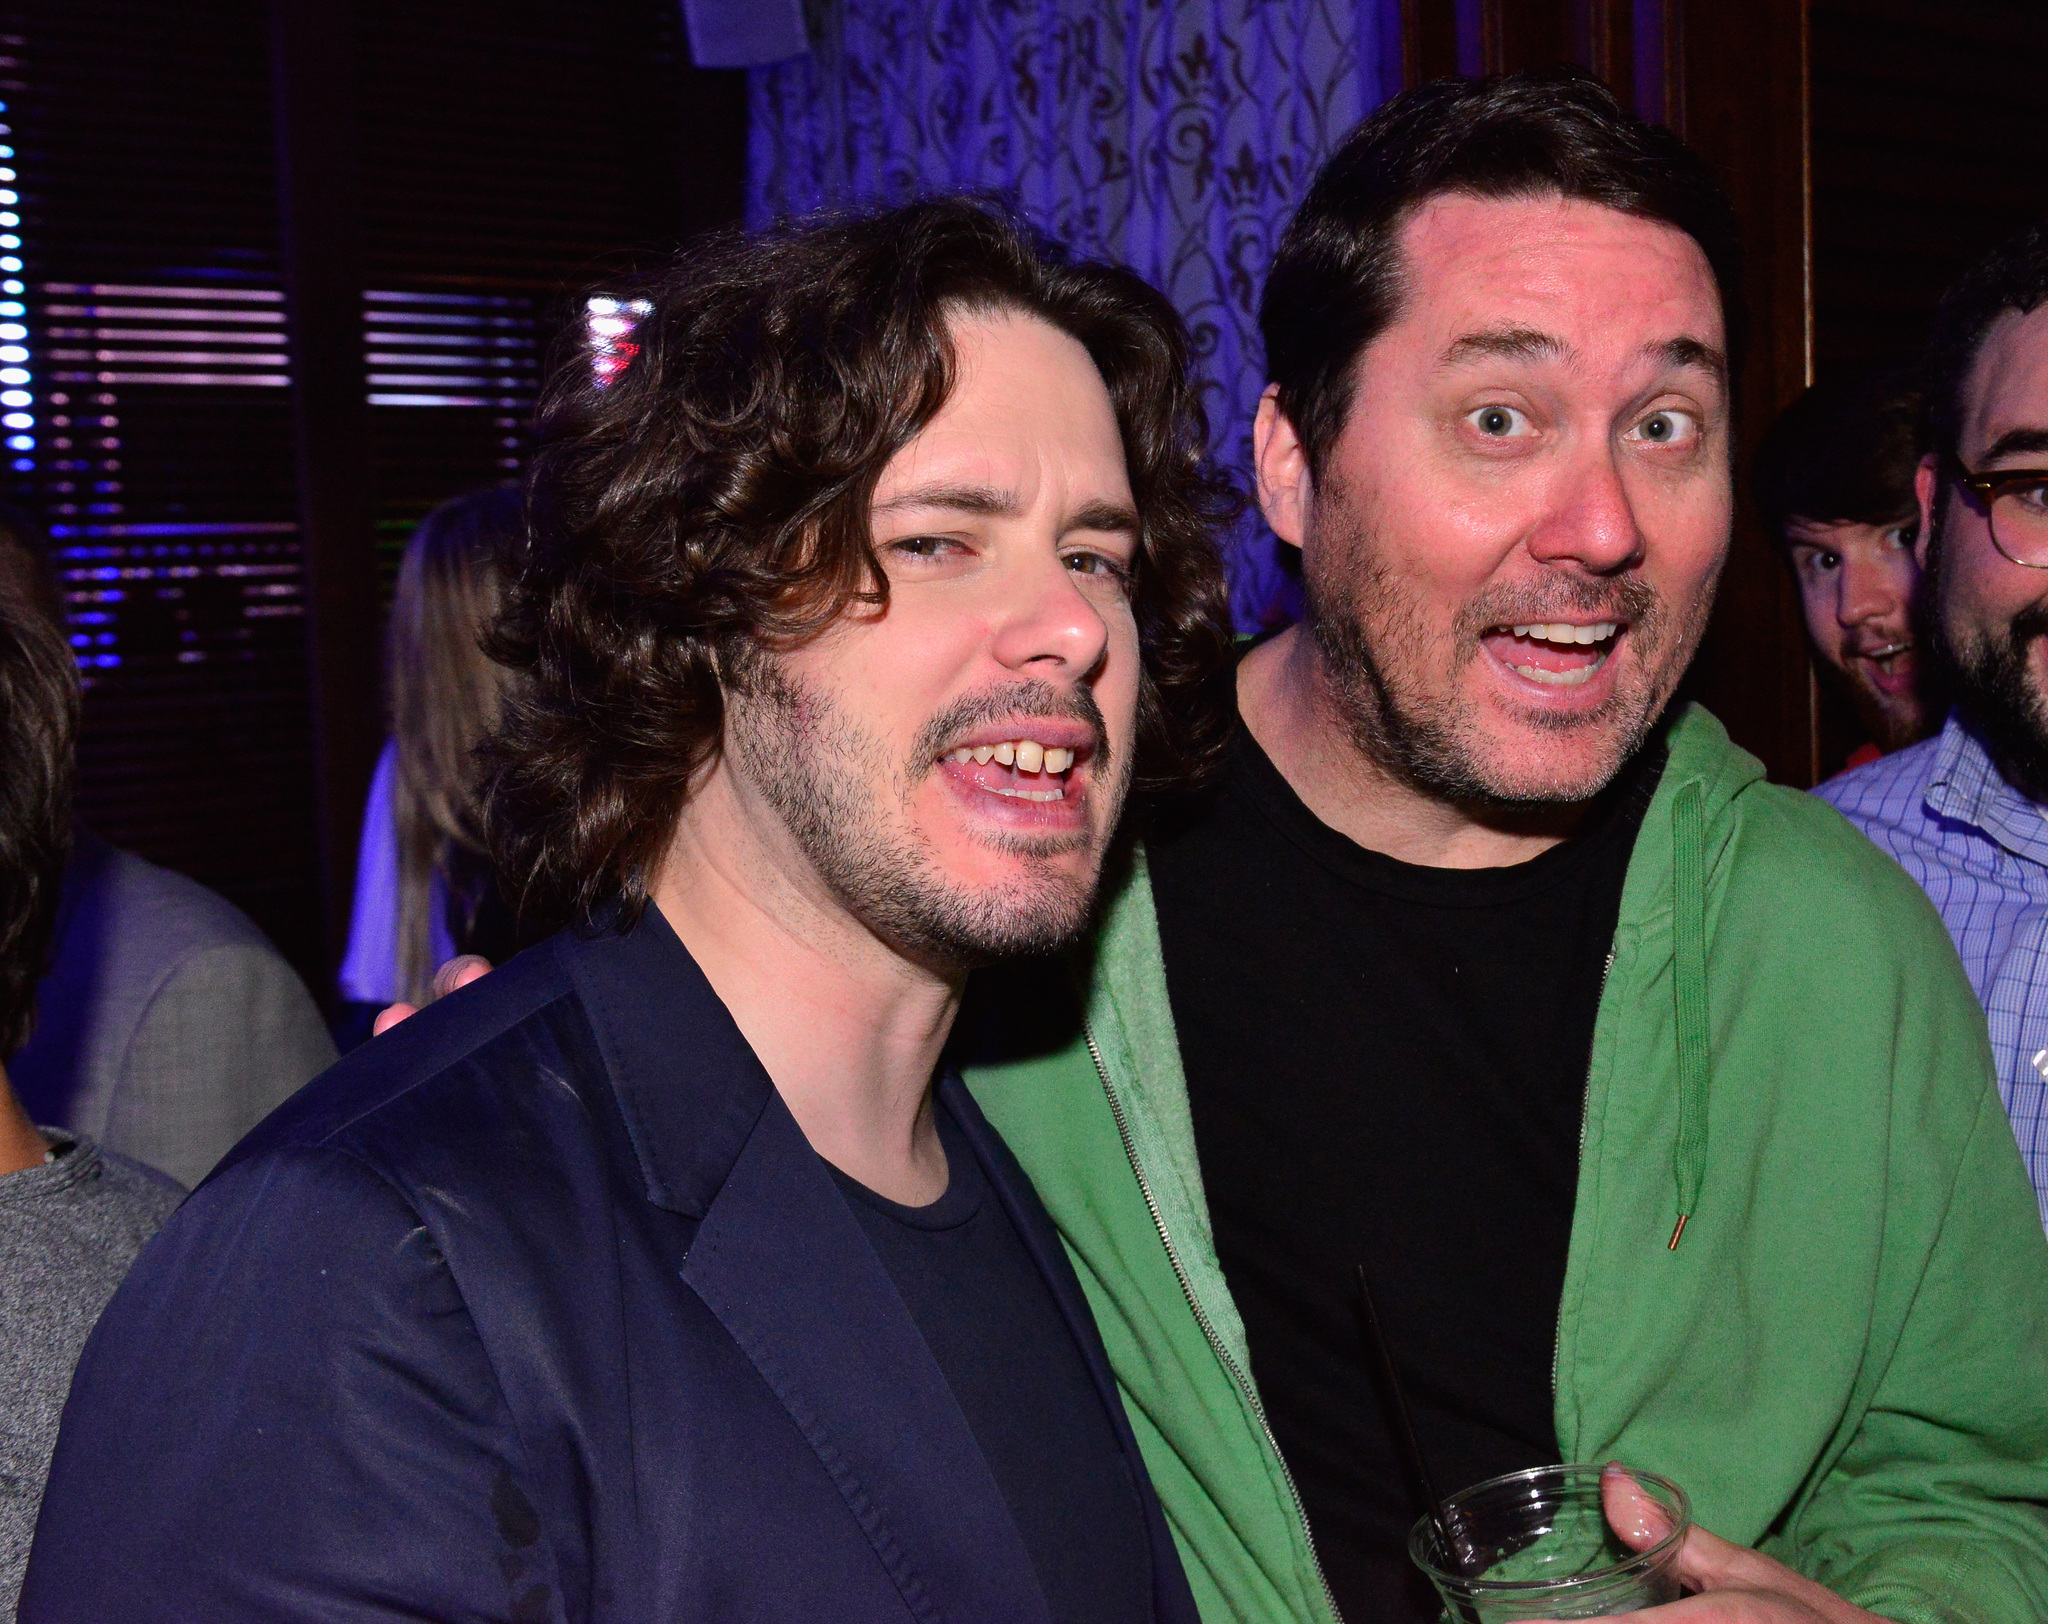 Doug Benson and Edgar Wright at event of The World's End (2013)